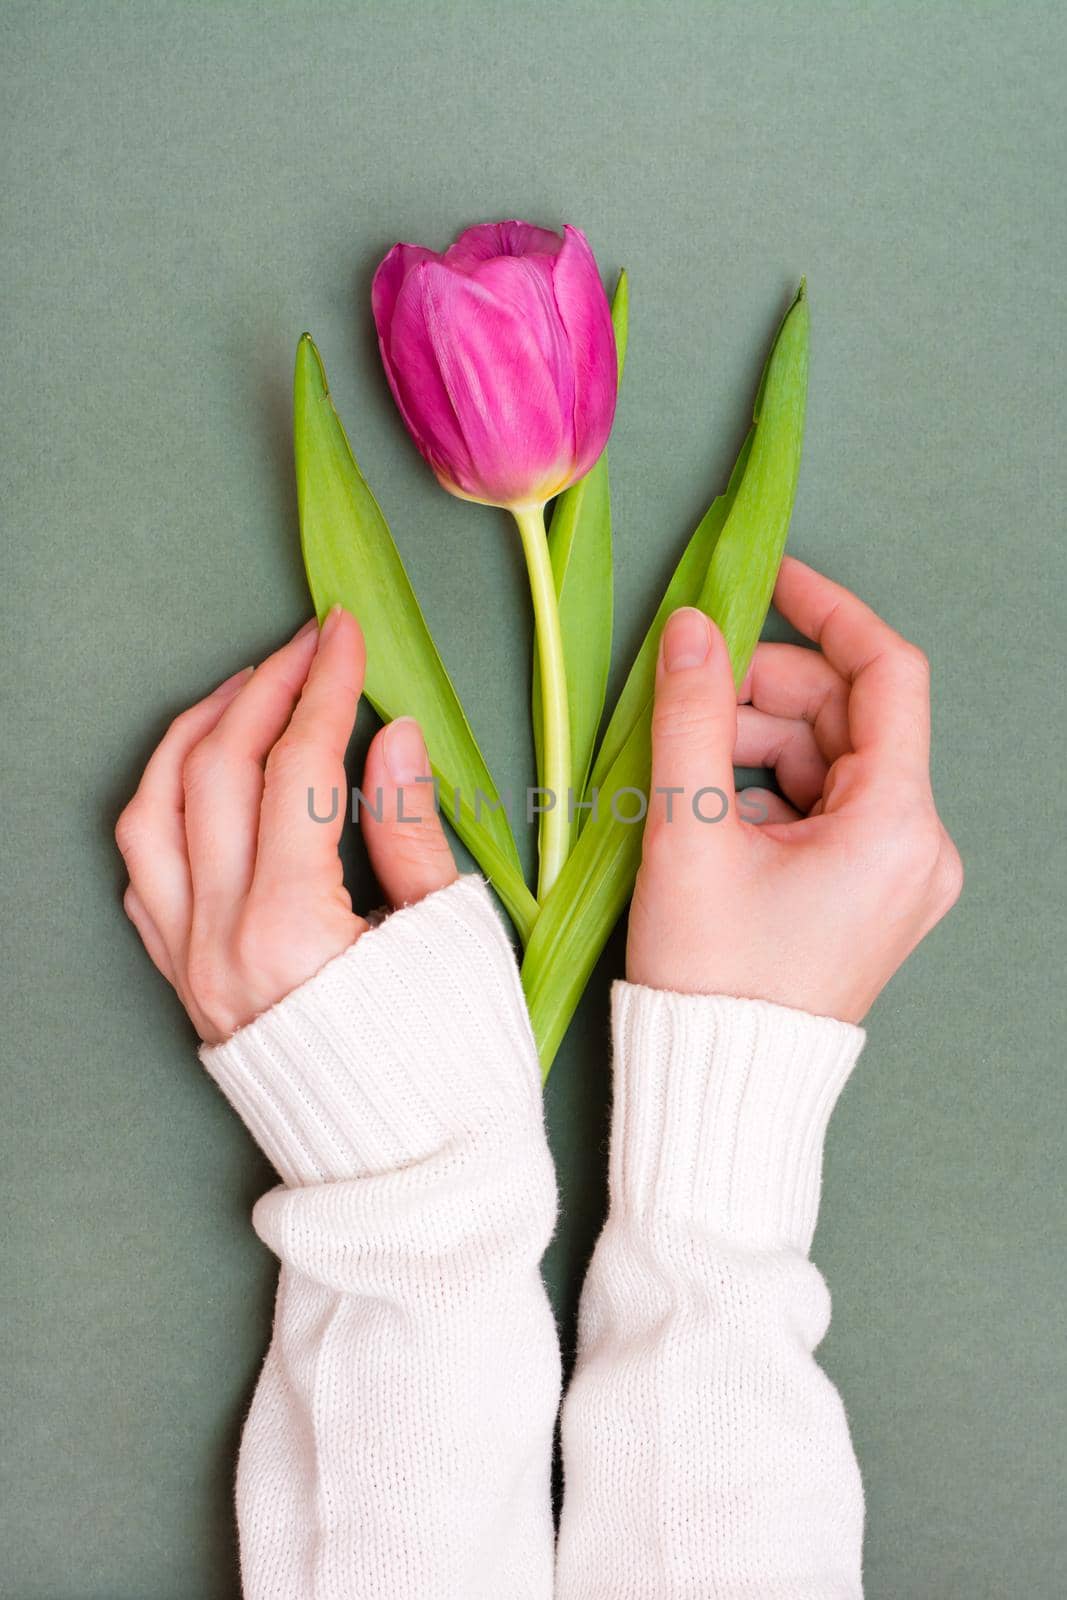 Lonely pink tulip with green leaves in female hands on a monochrome dark background. Vertical view by Aleruana